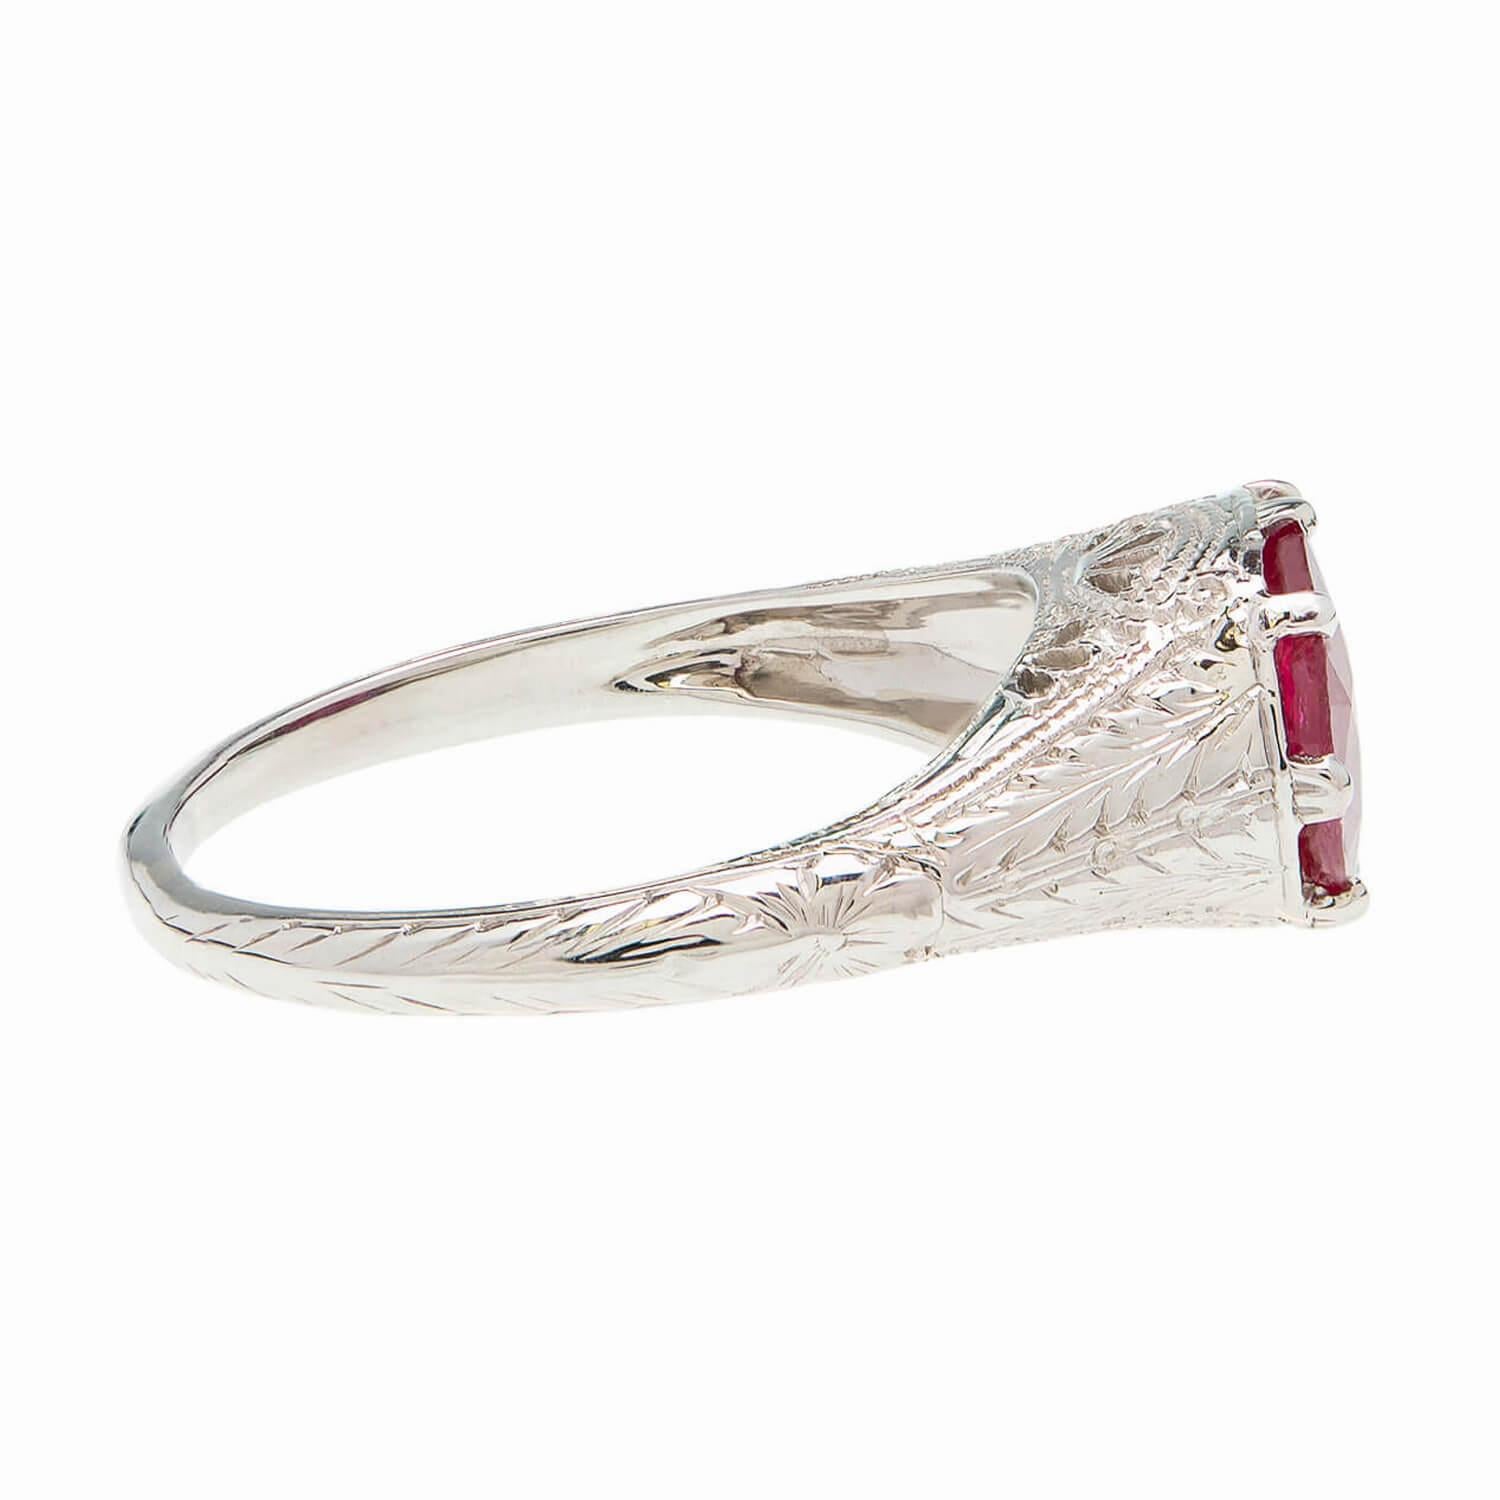 An unusual gemstone ring from the Art Deco (ca1920s) era! Crafted in 19k white gold, this beautiful ring frames a 2.51ct solitaire ruby at the center of a filigree mounting. The gorgeous ruby is polished into a faceted oval shape, displaying a